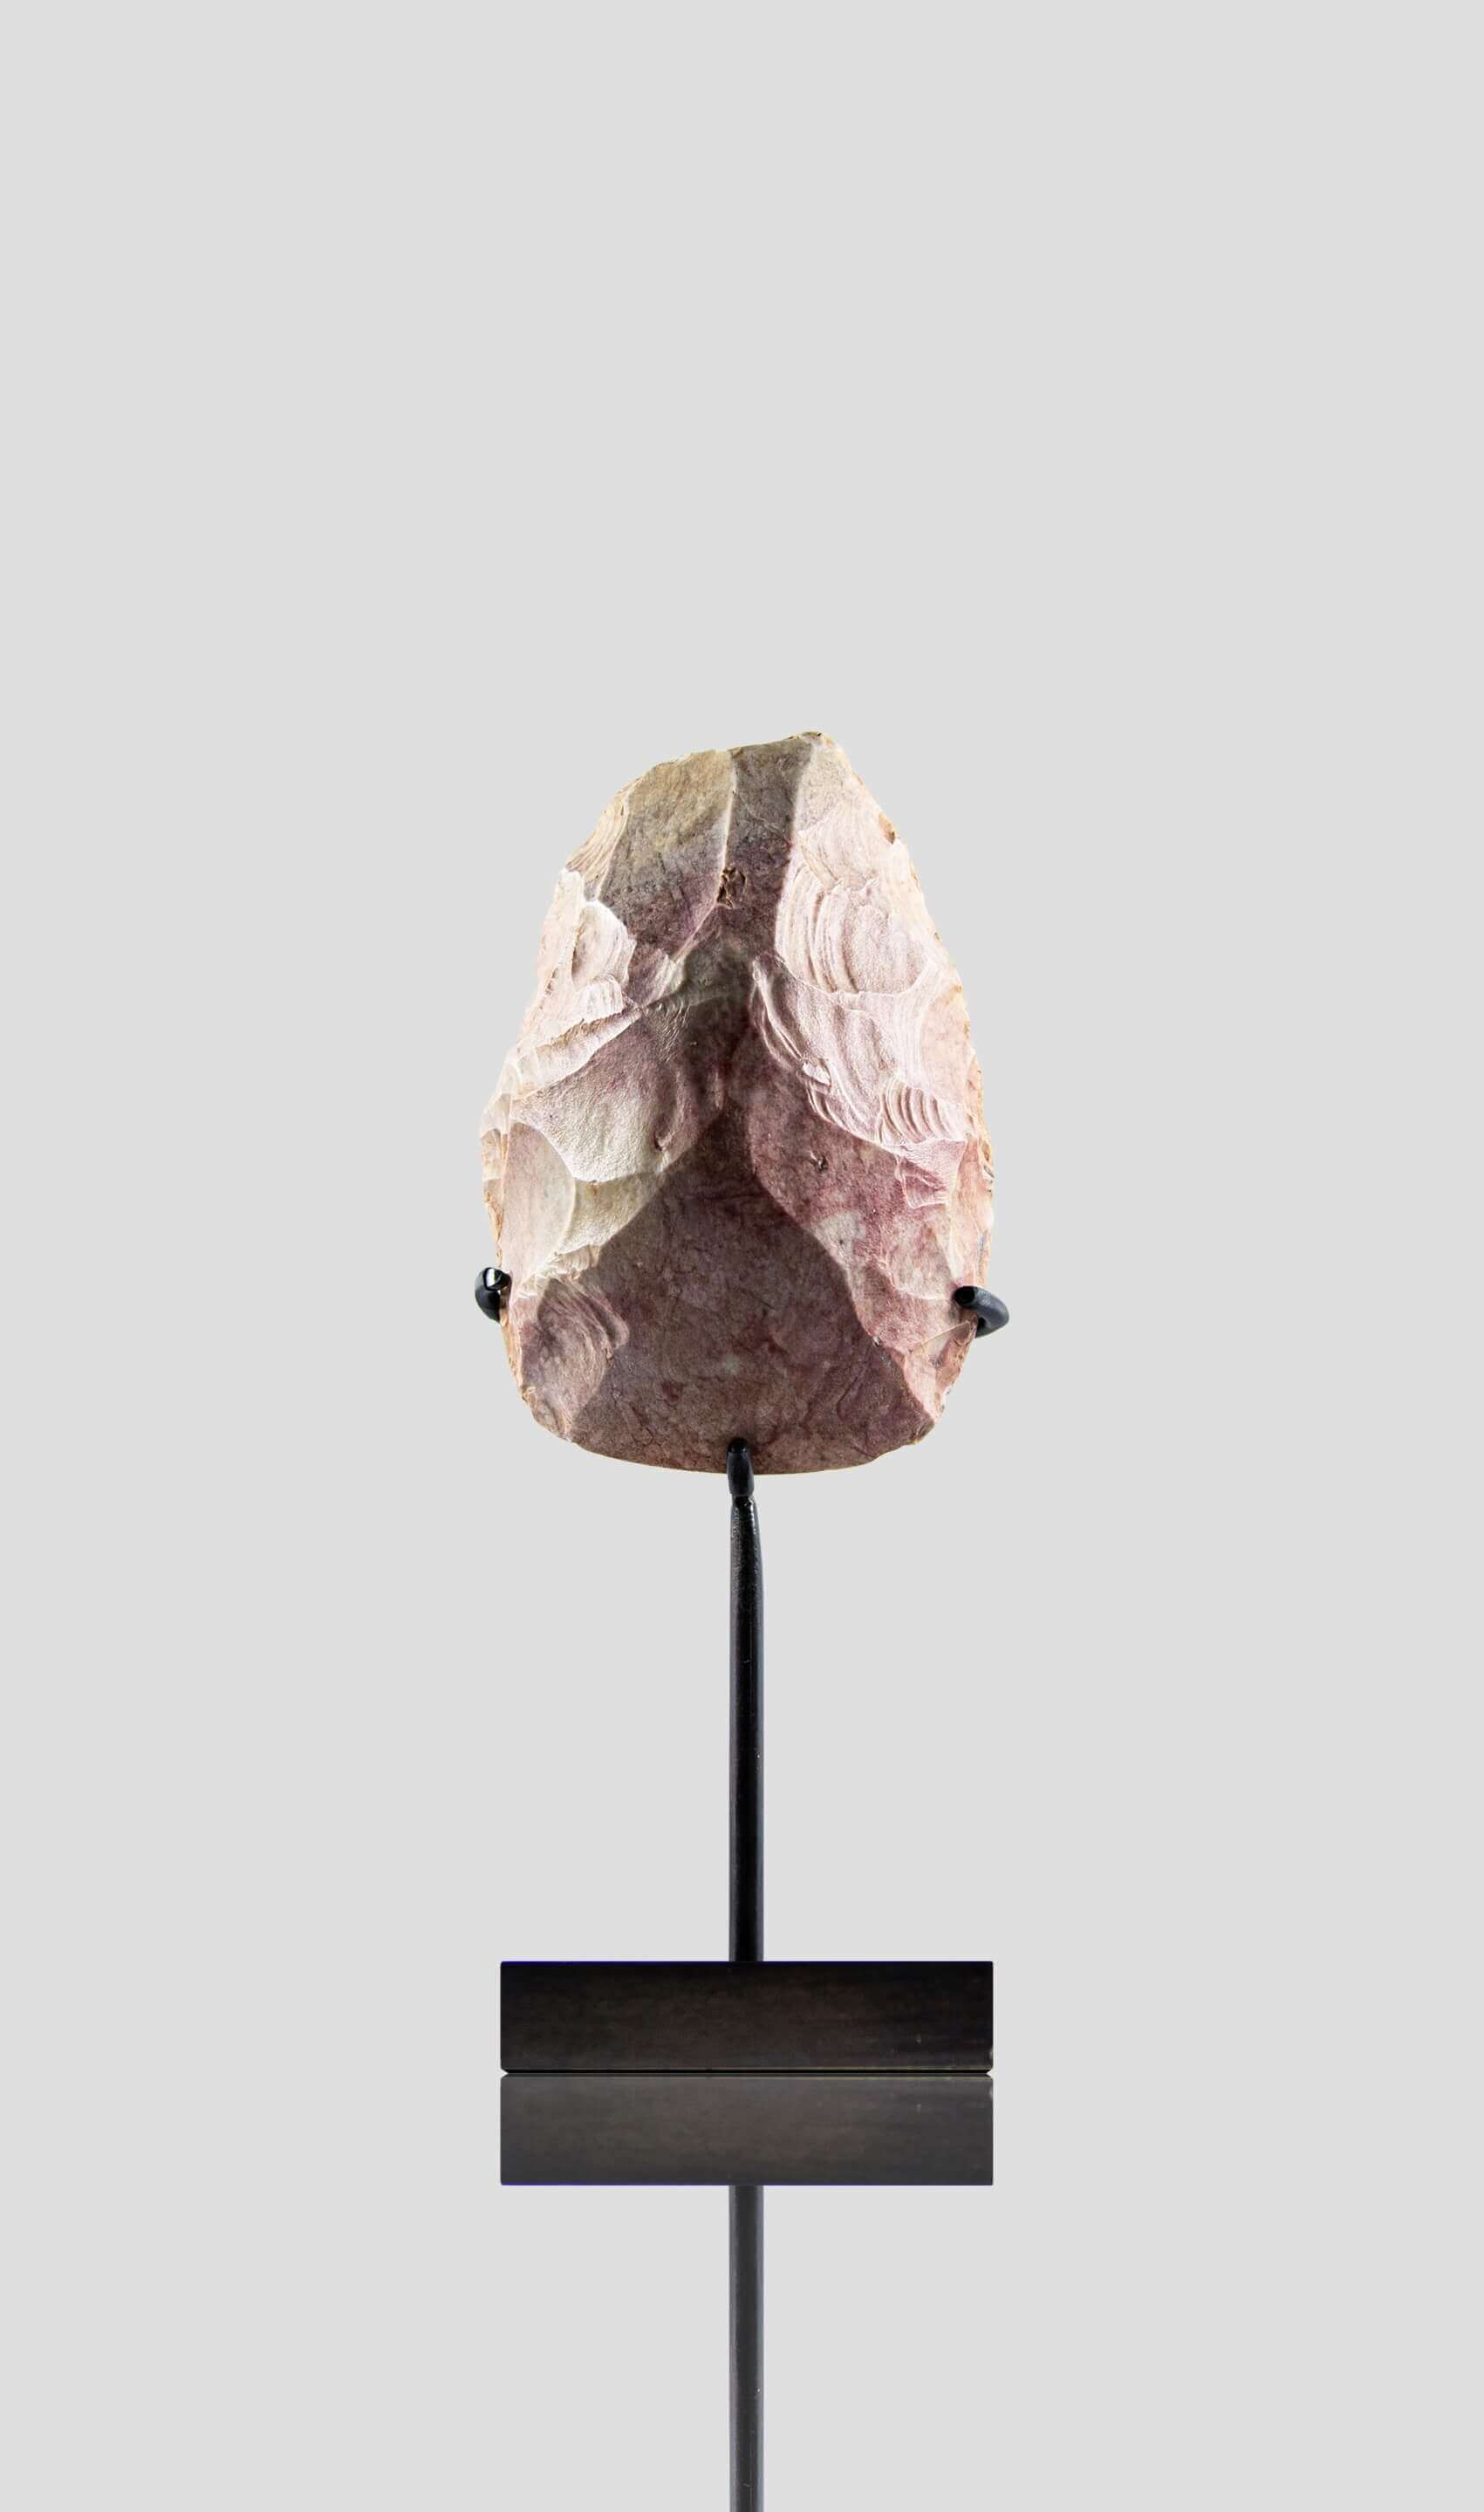 Artefact Neolithic Capsian Hand Axe [8,500 BC] 104mm